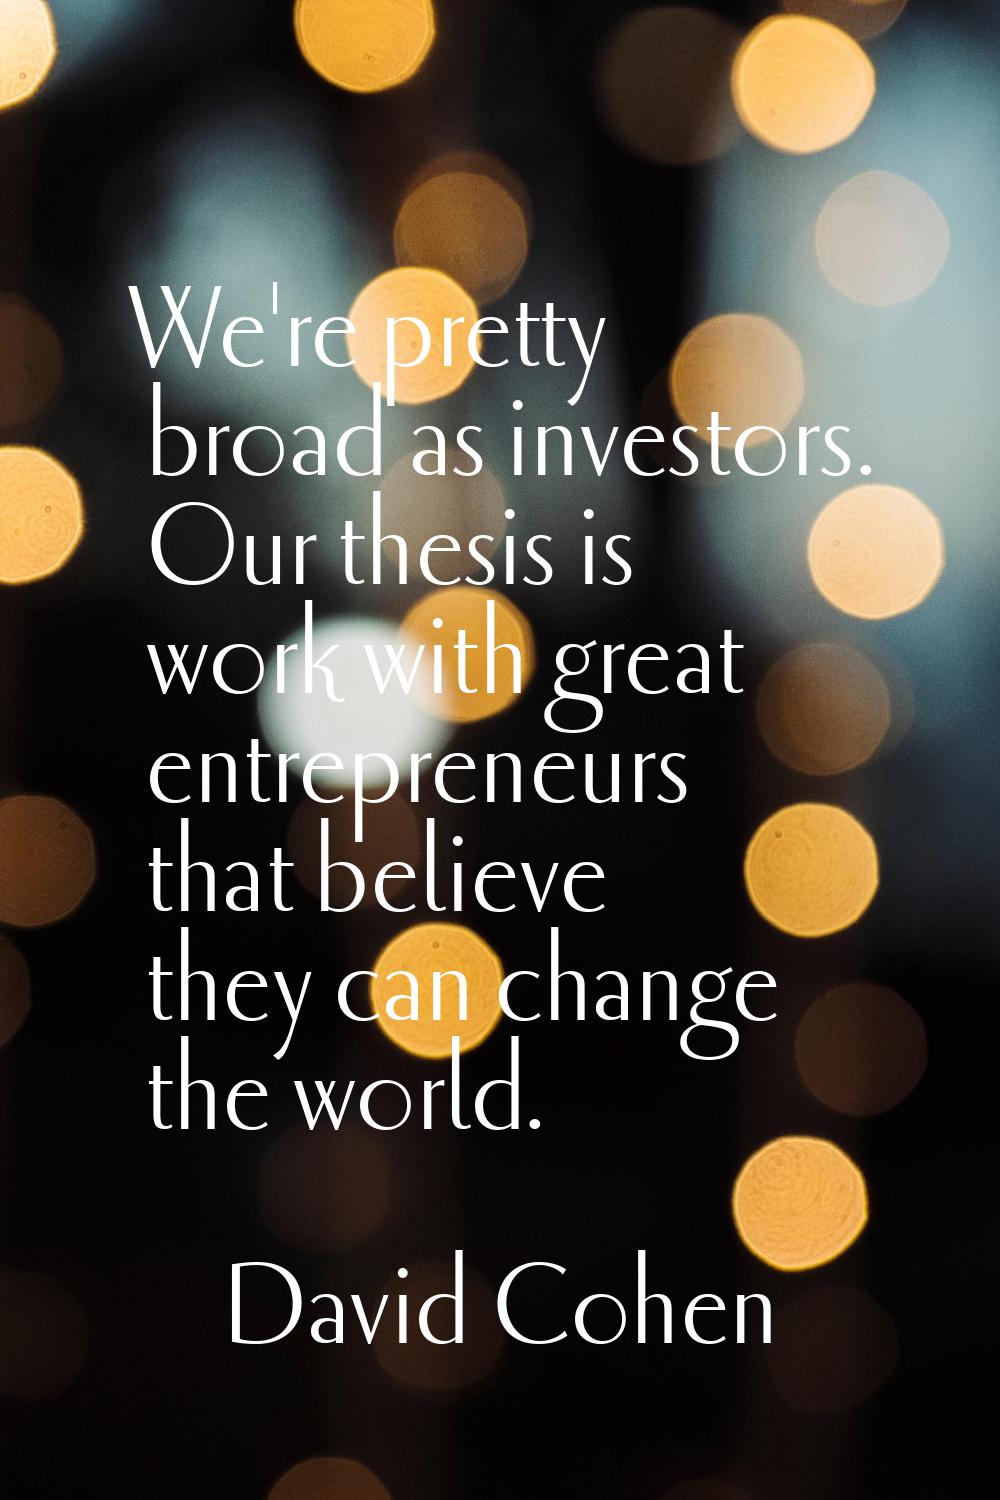 We're pretty broad as investors. Our thesis is work with great entrepreneurs that believe they can 